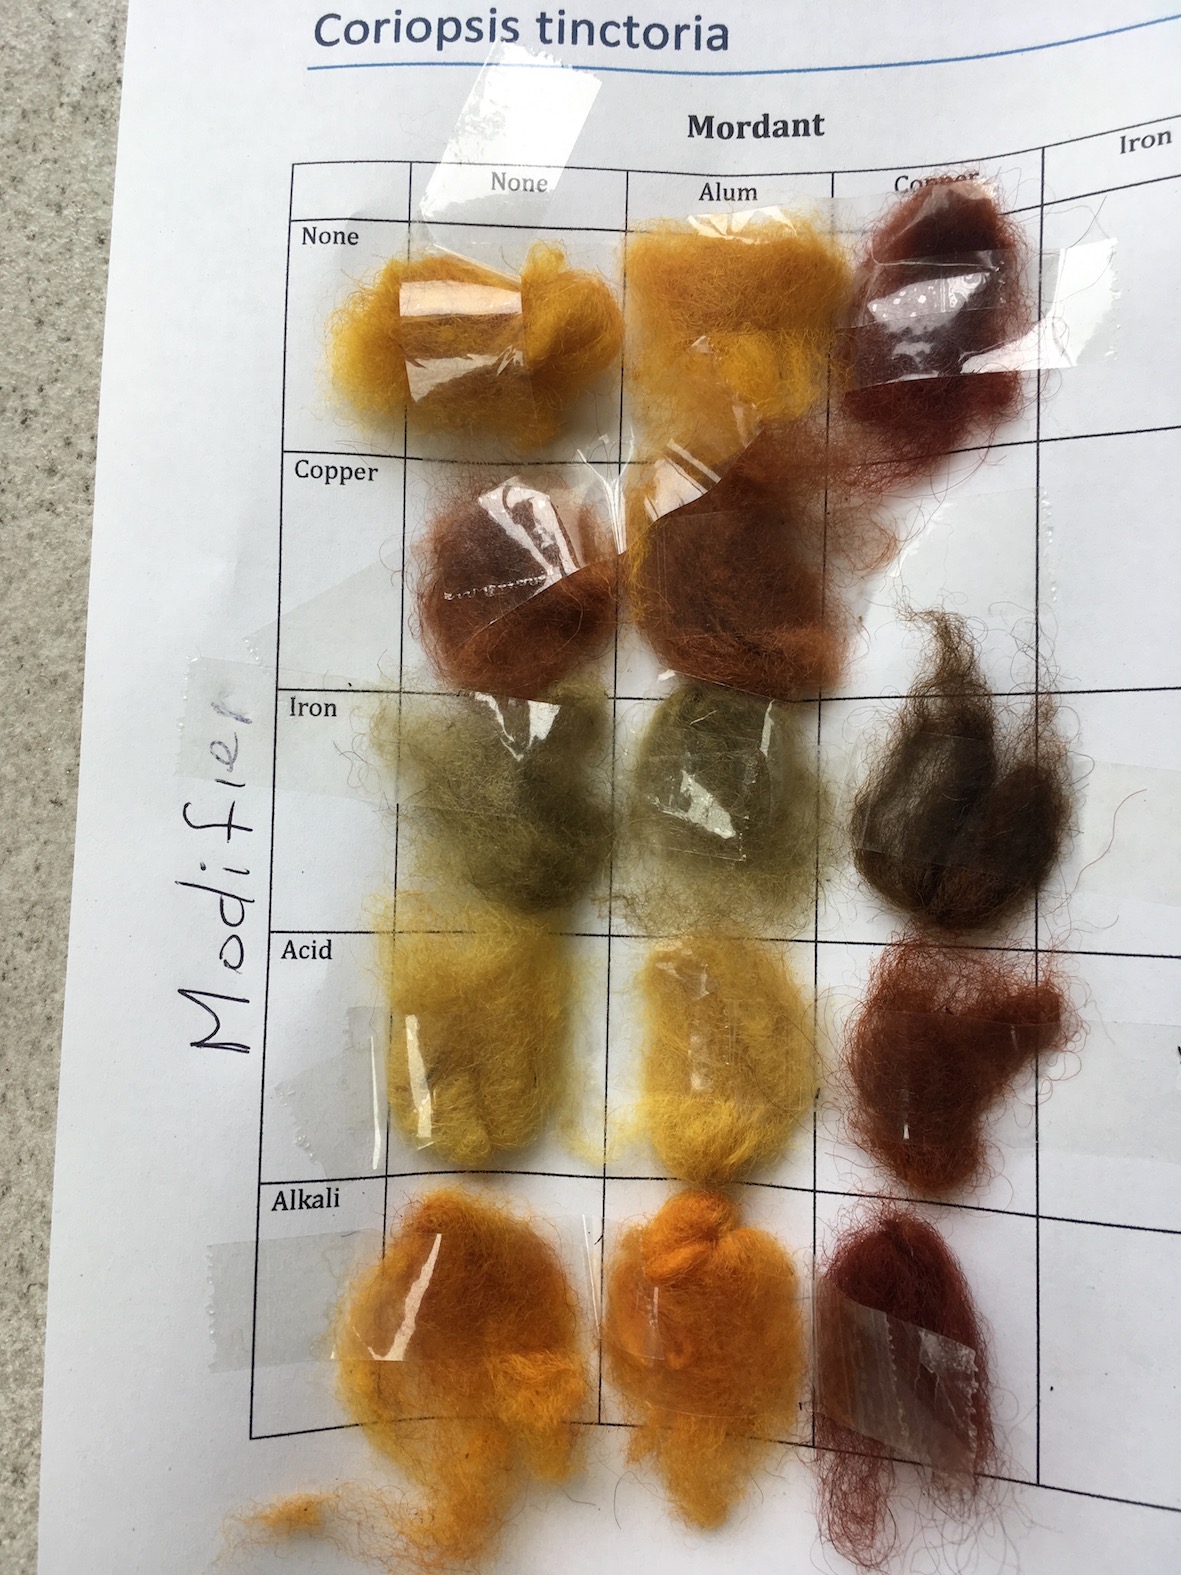 Samples dyed from dyers' tickweed